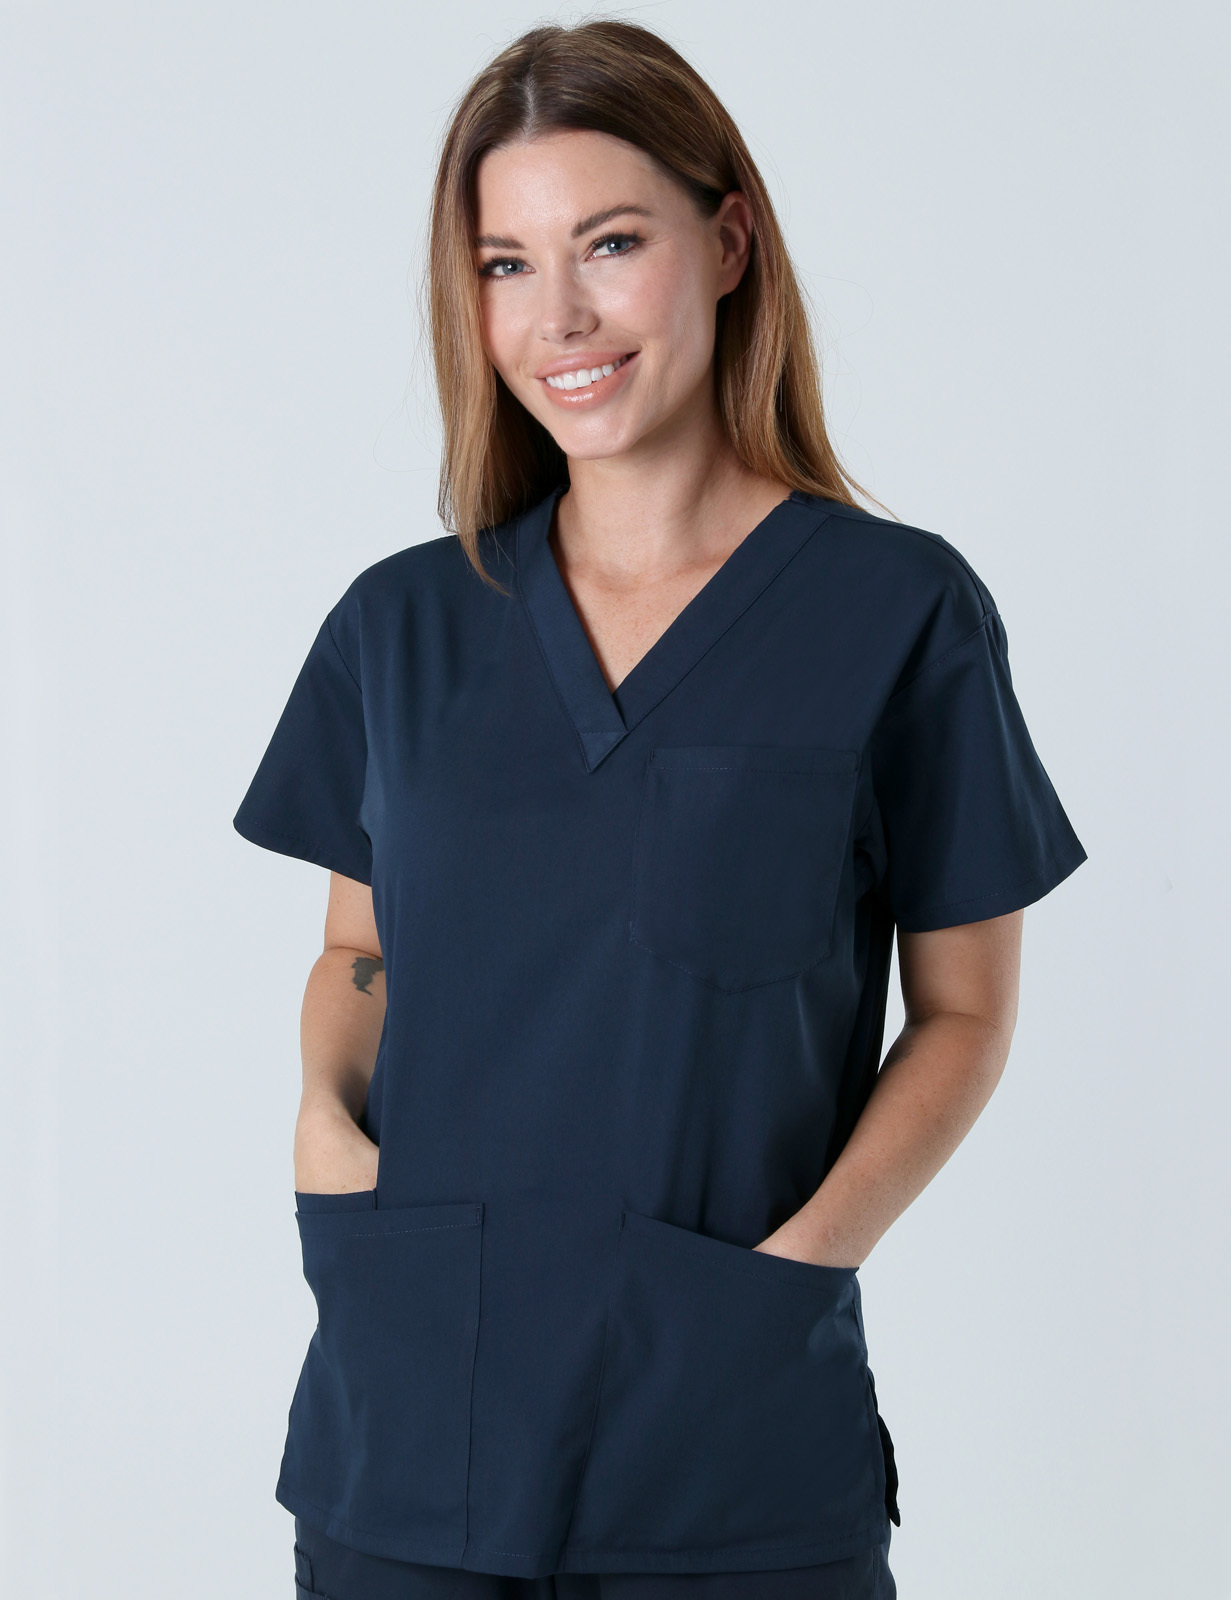 RBWH Neurology Out Patient Department -  Neurophysiology Scientist Uniform Bundle (4 Pocket Top and Cargo Pants In Navy incl Logos)